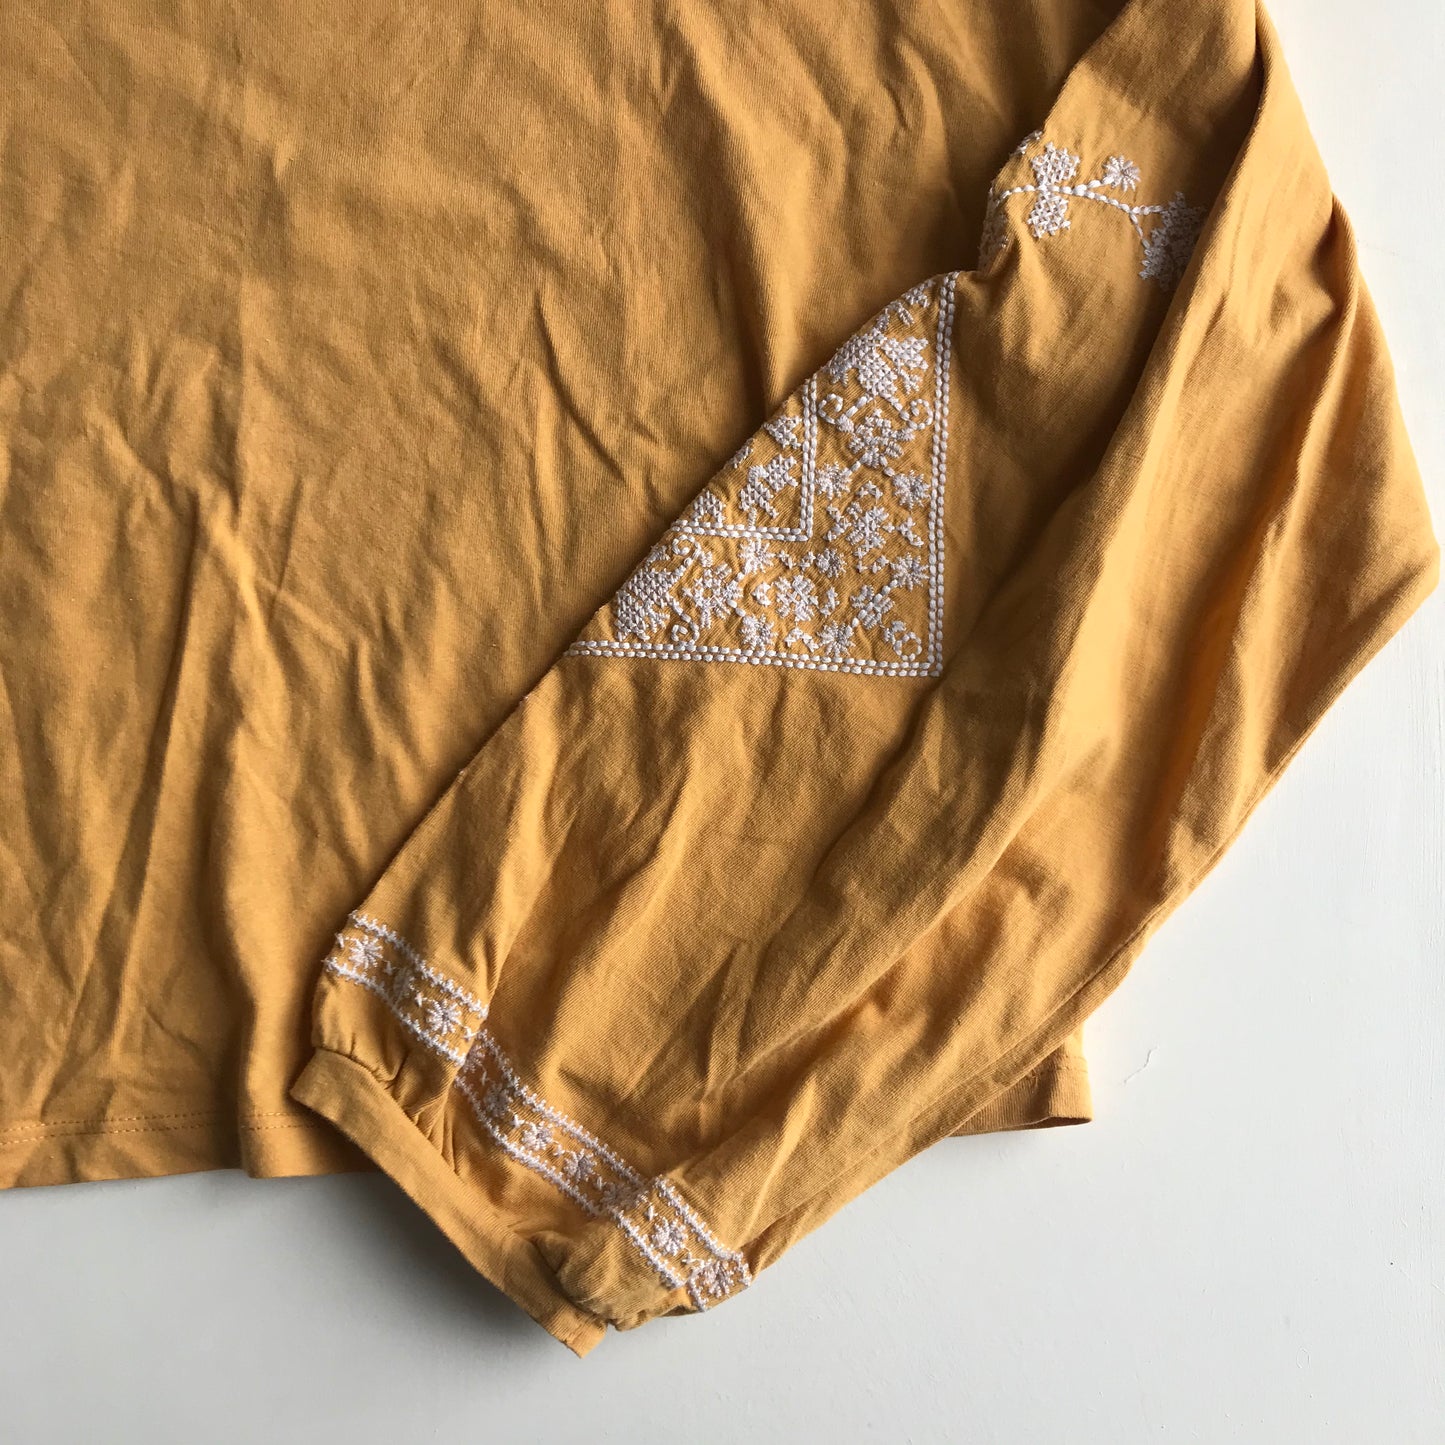 T-shirt - Cropped Yellow - Age 12